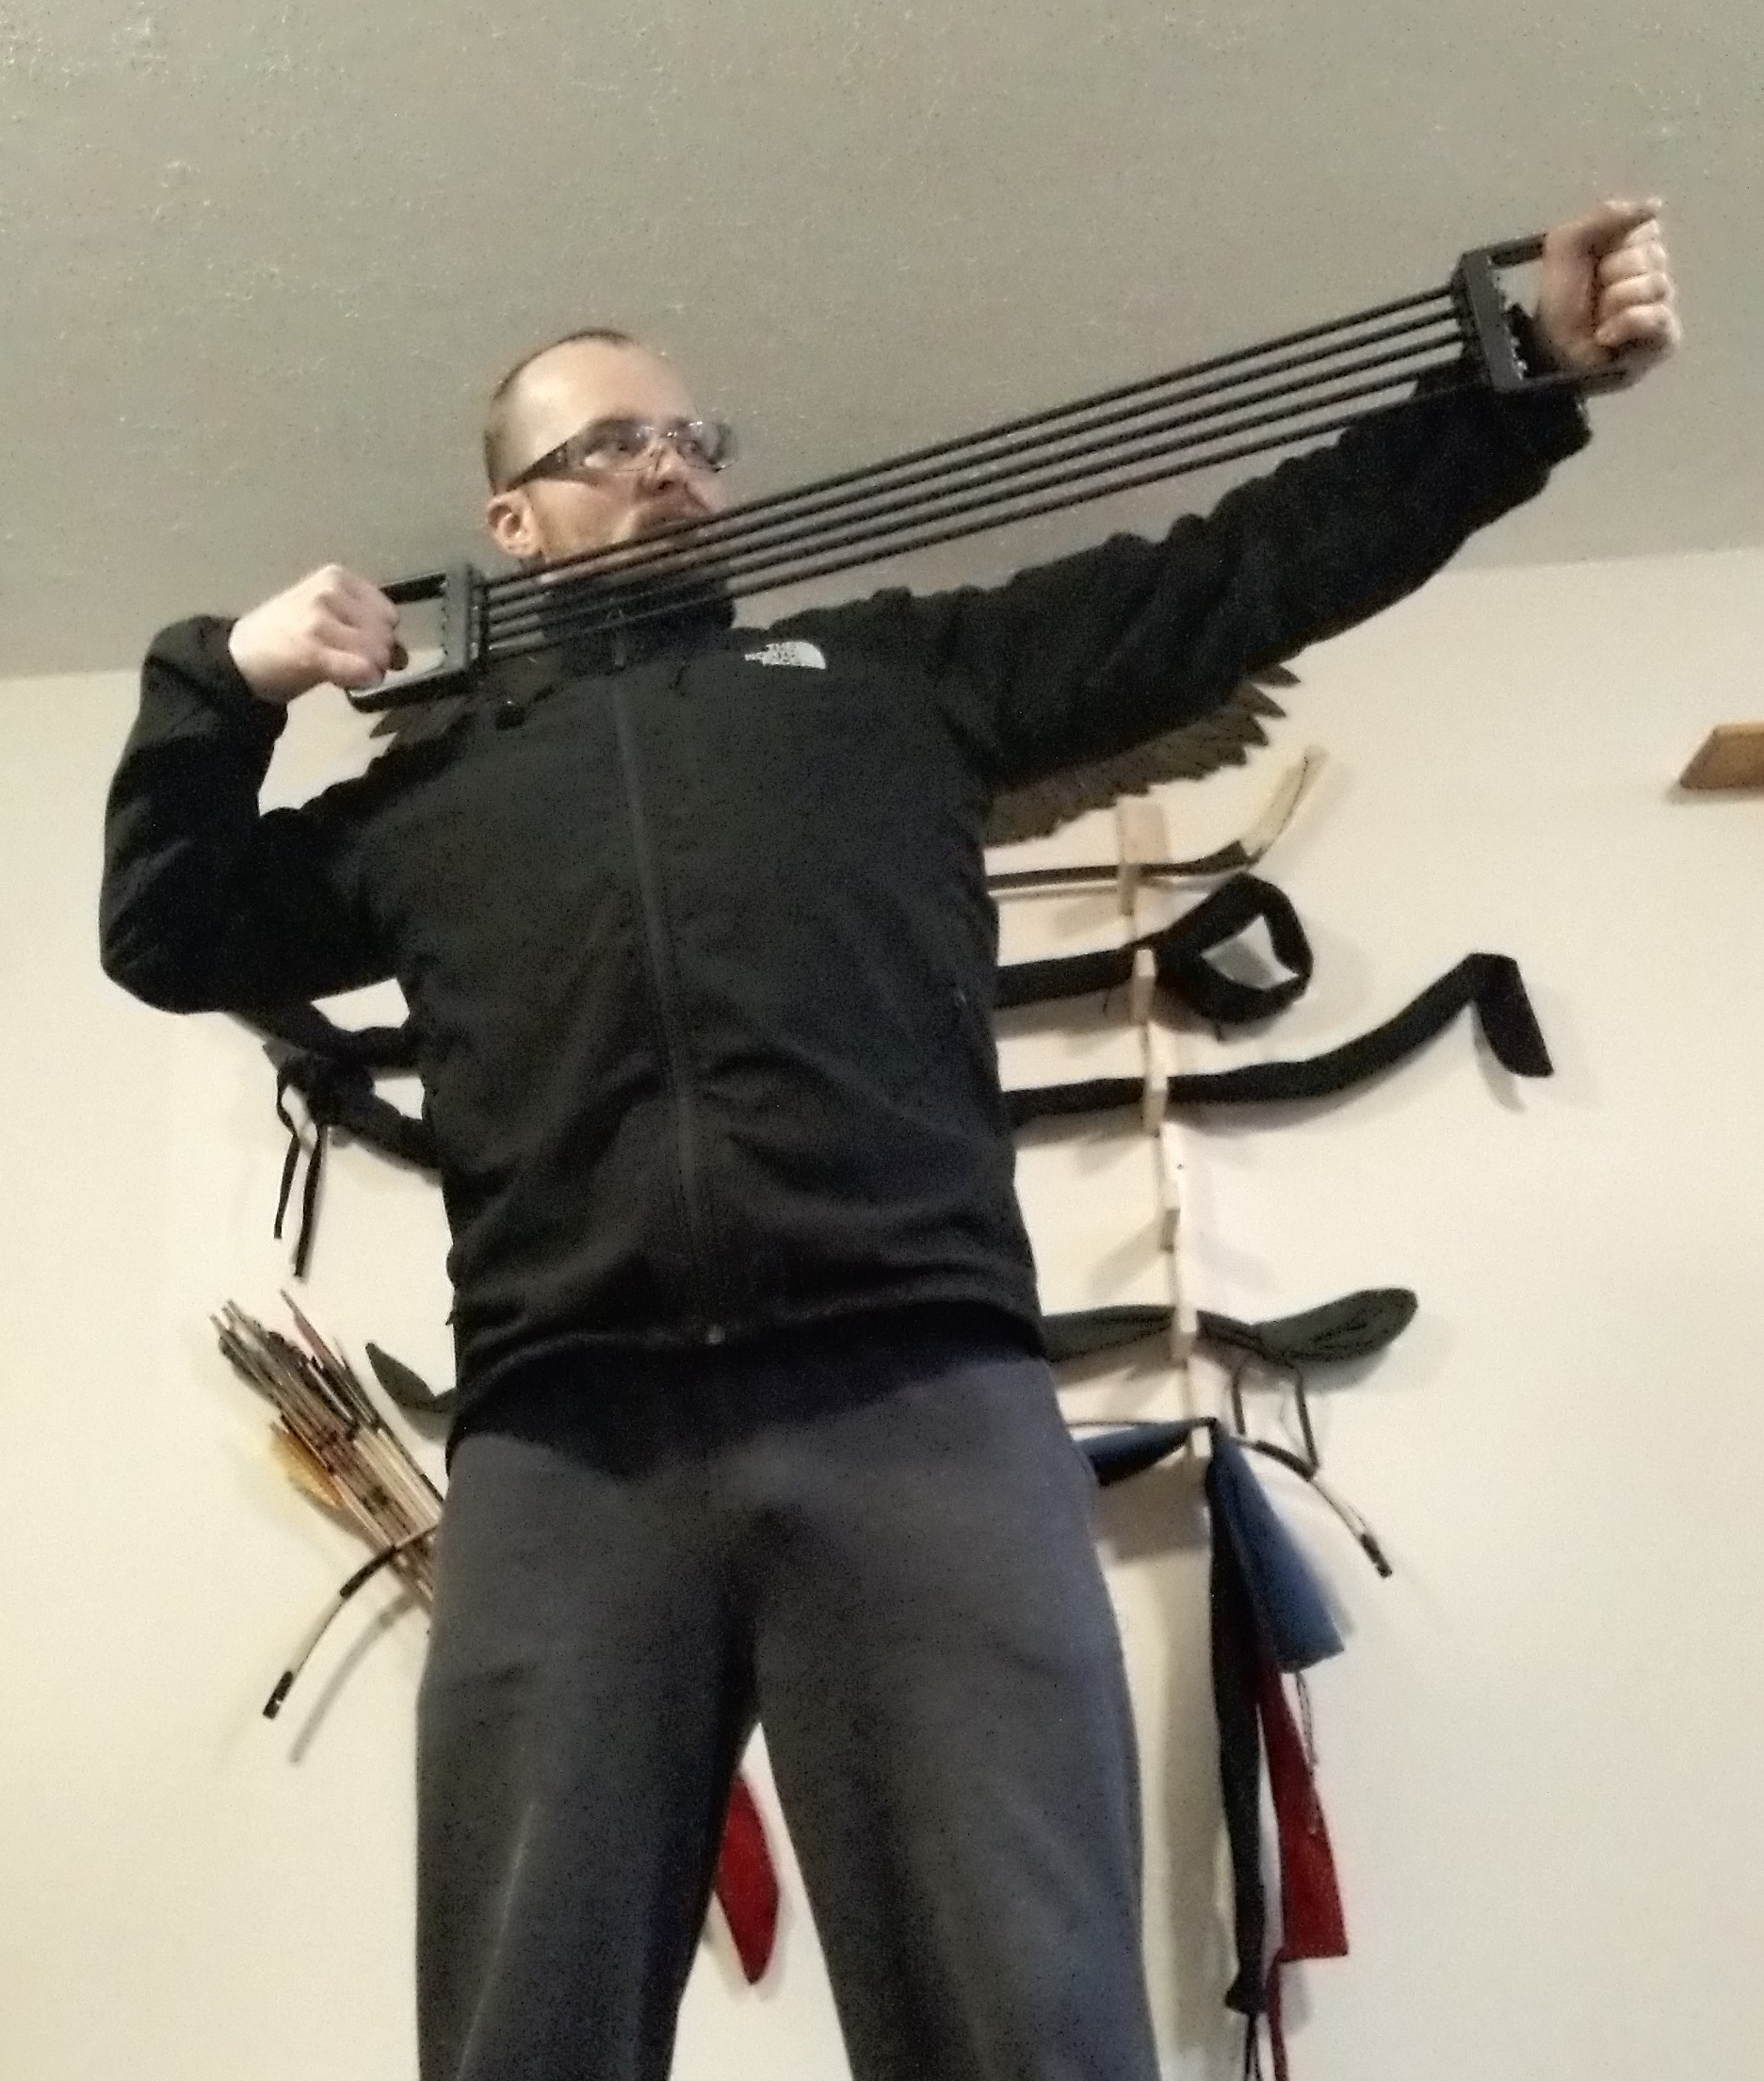 Archery Exercises to Increase Draw Weight Strengthen Archery Muscles